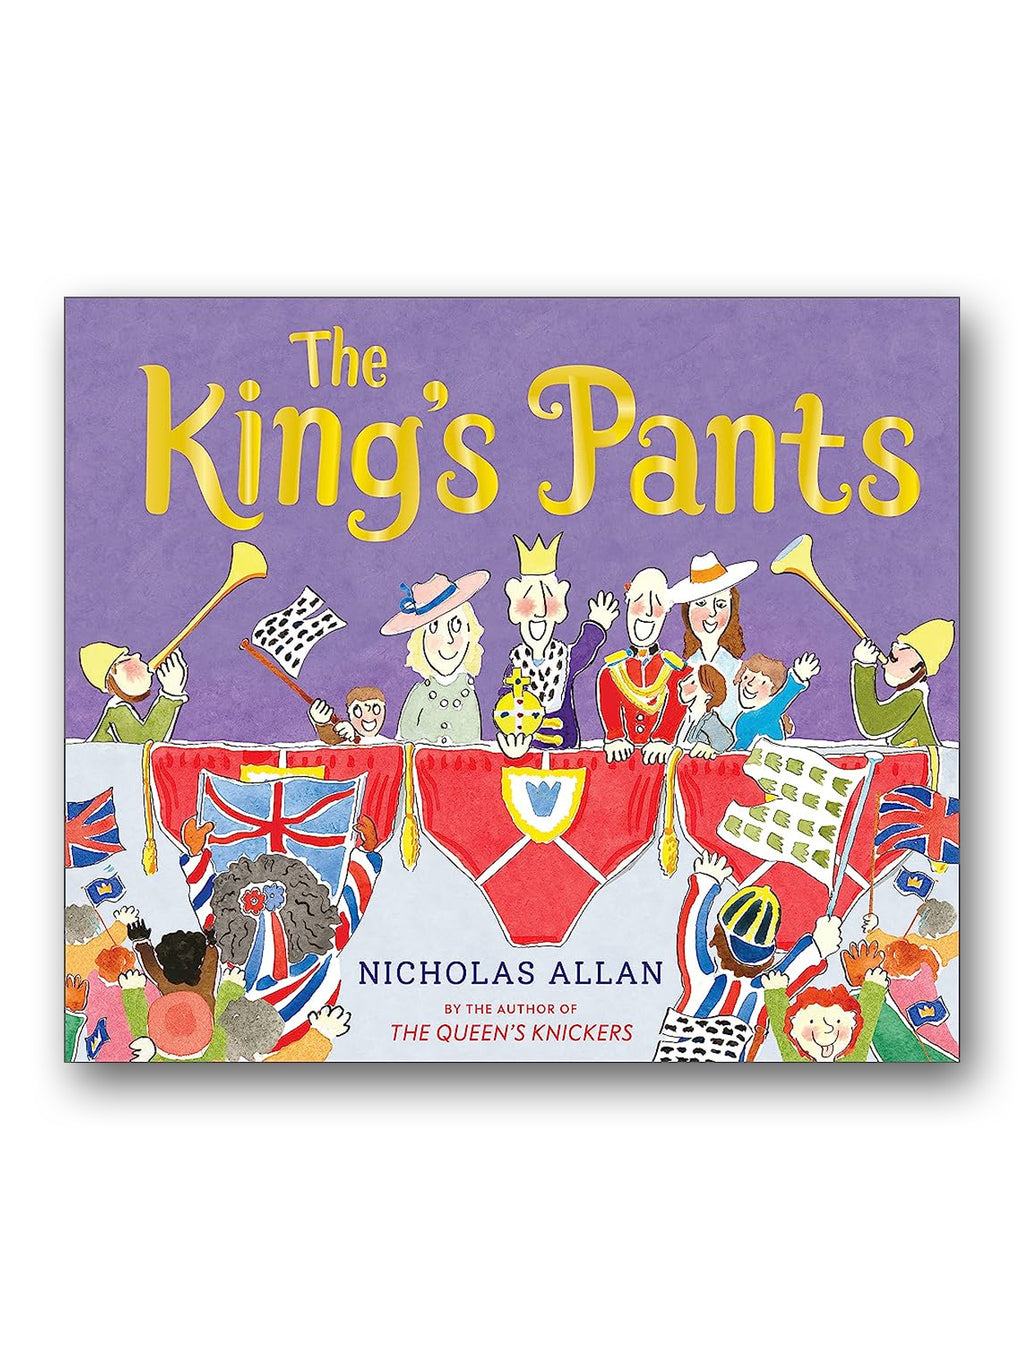 The King's Pants